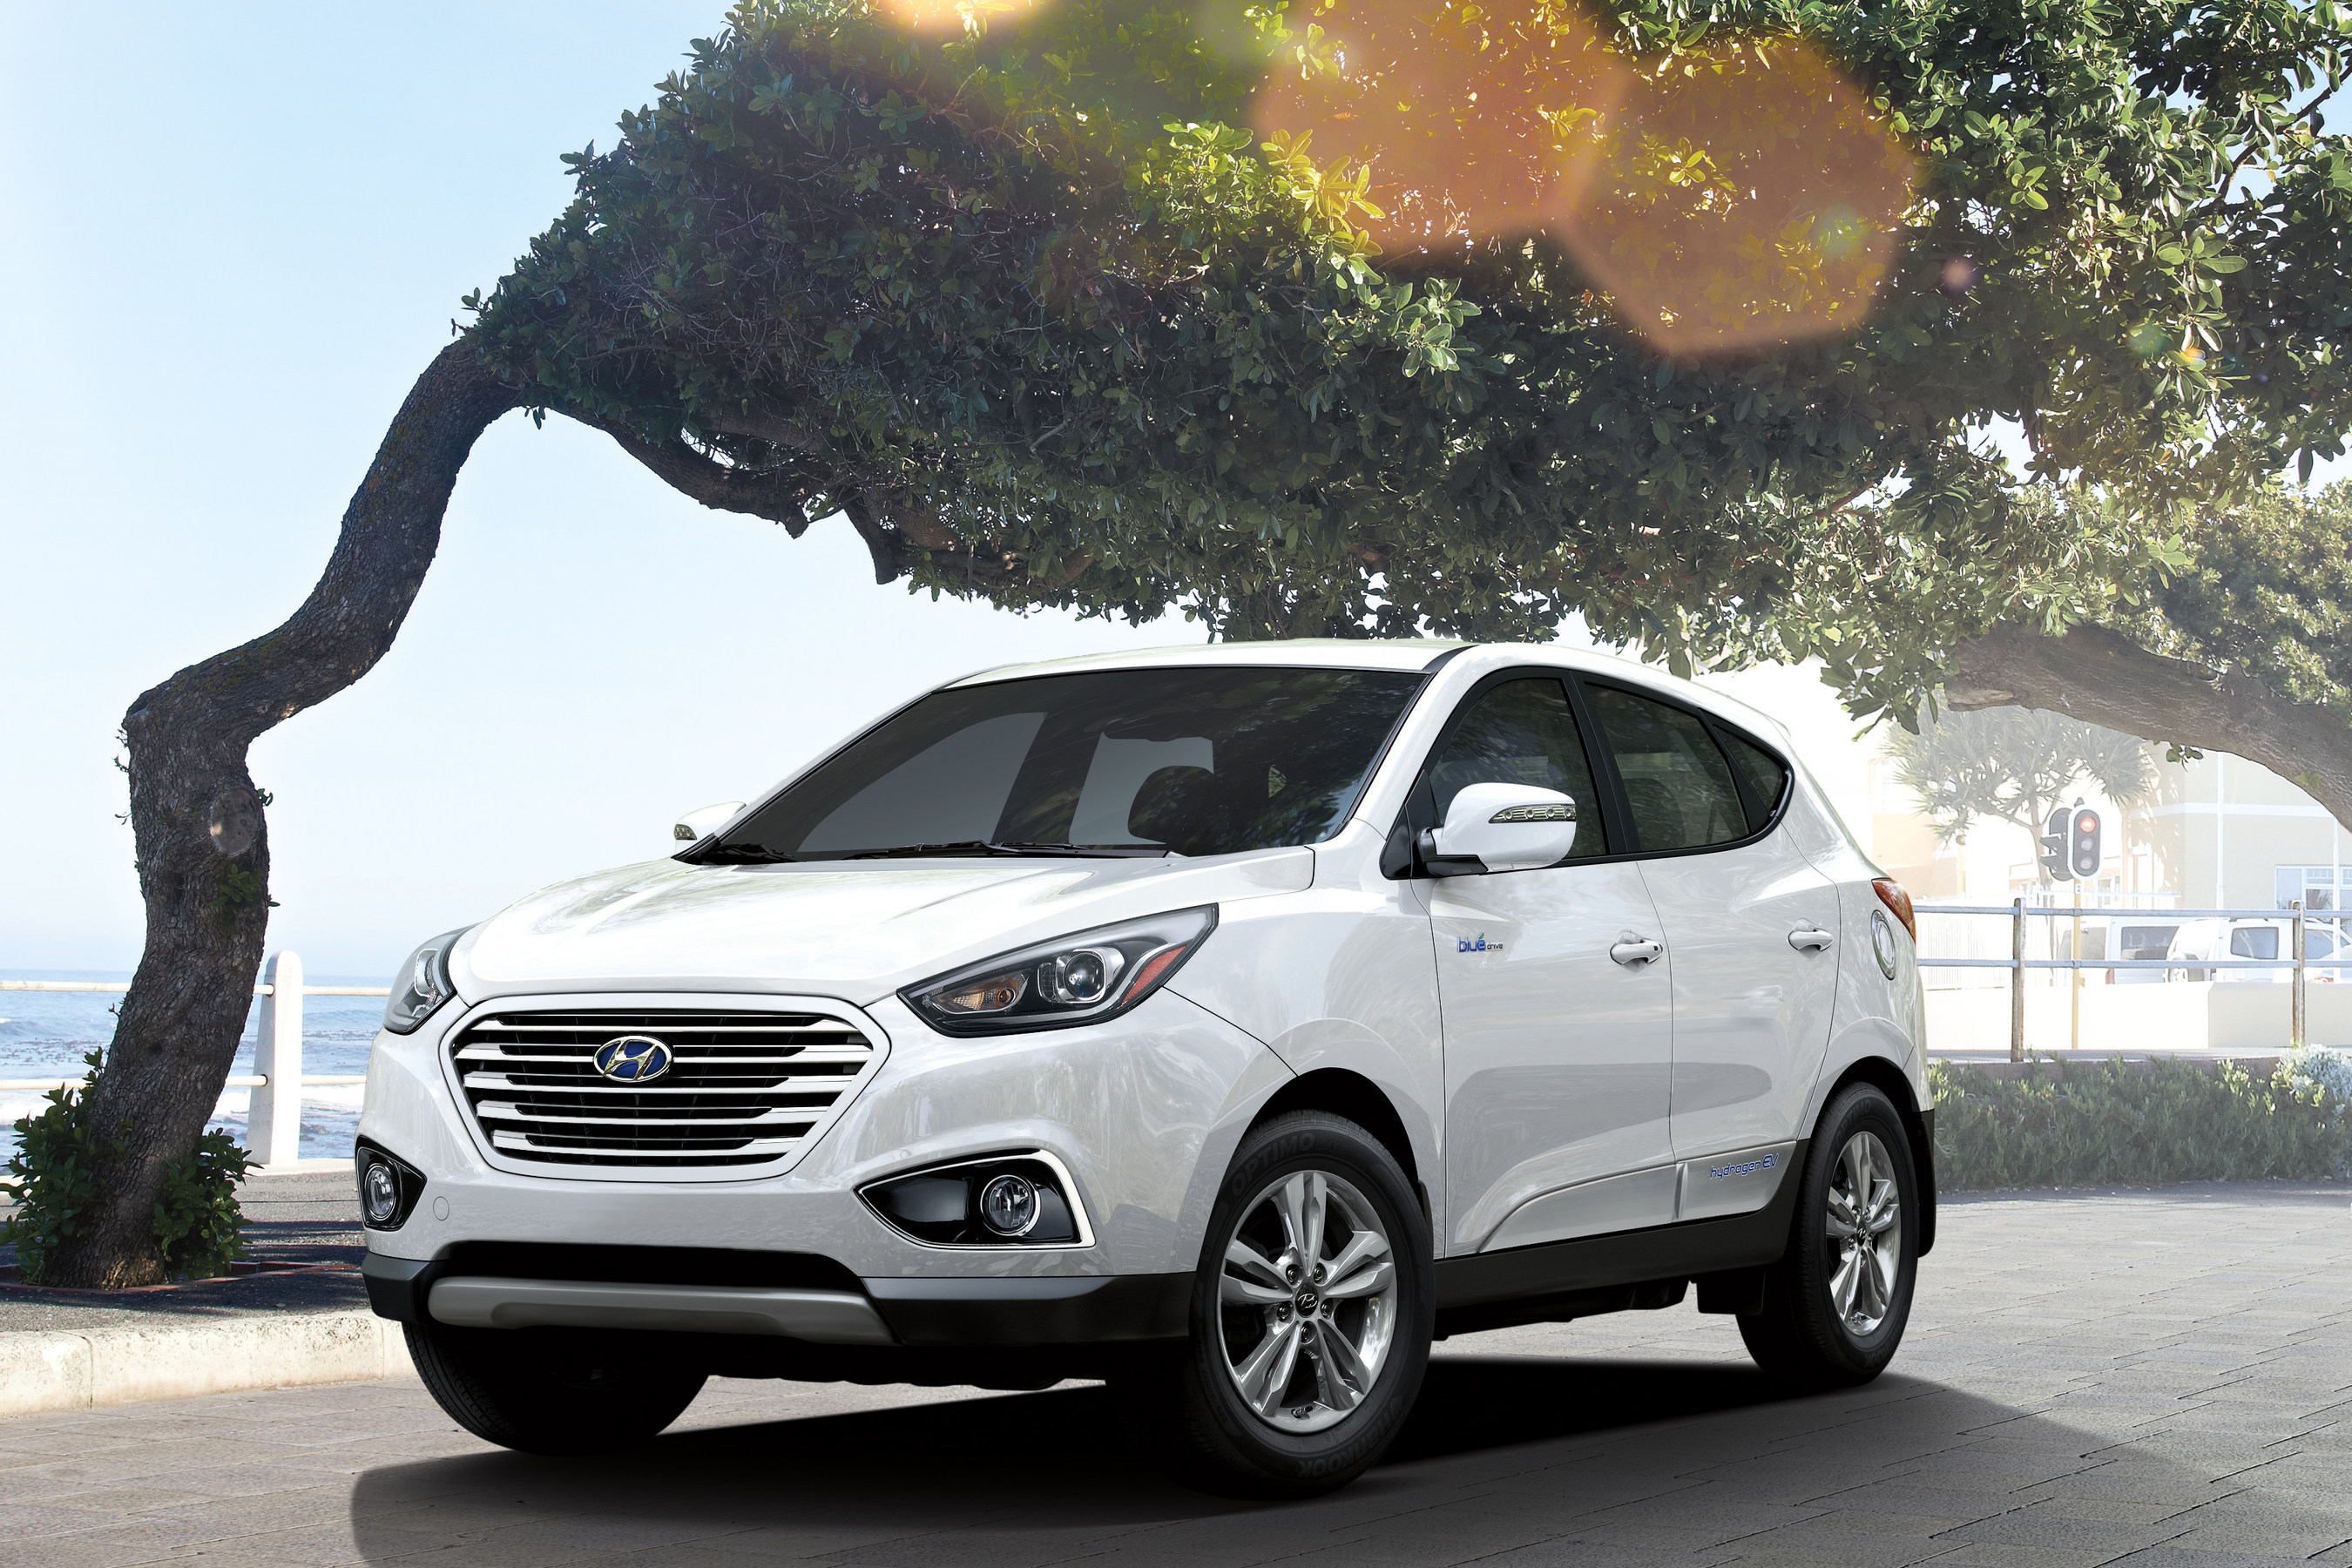 Hyundai Collaborates With Congressional Hydrogen and Fuel Cell Caucus to Highlight Introduction of Mass-Produced Fuel Cell Vehicles in the Retail Market